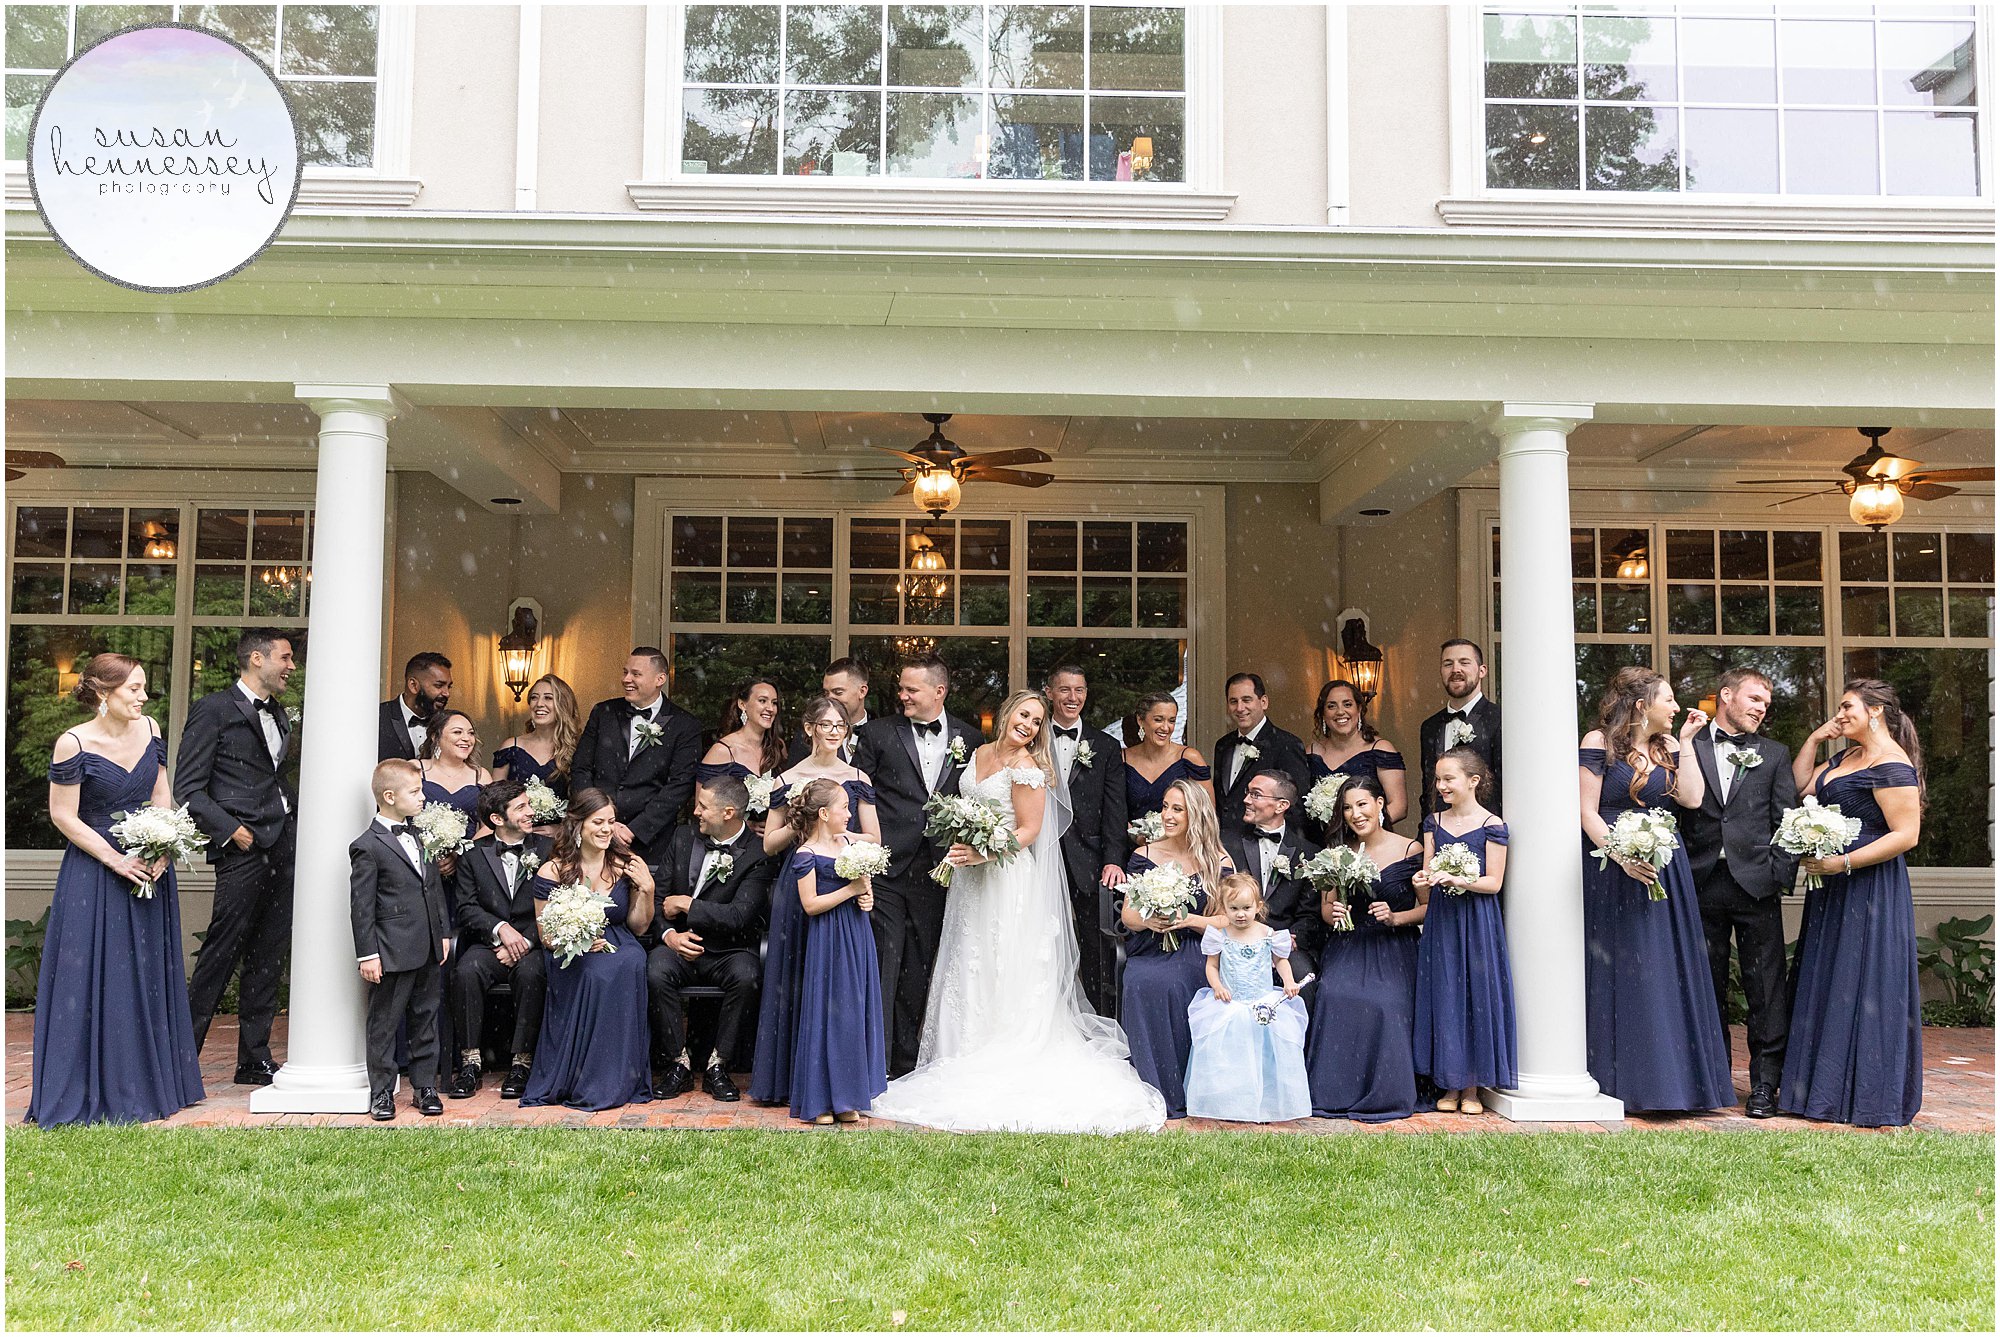 Wedding at The Bradford Estate with bridal party